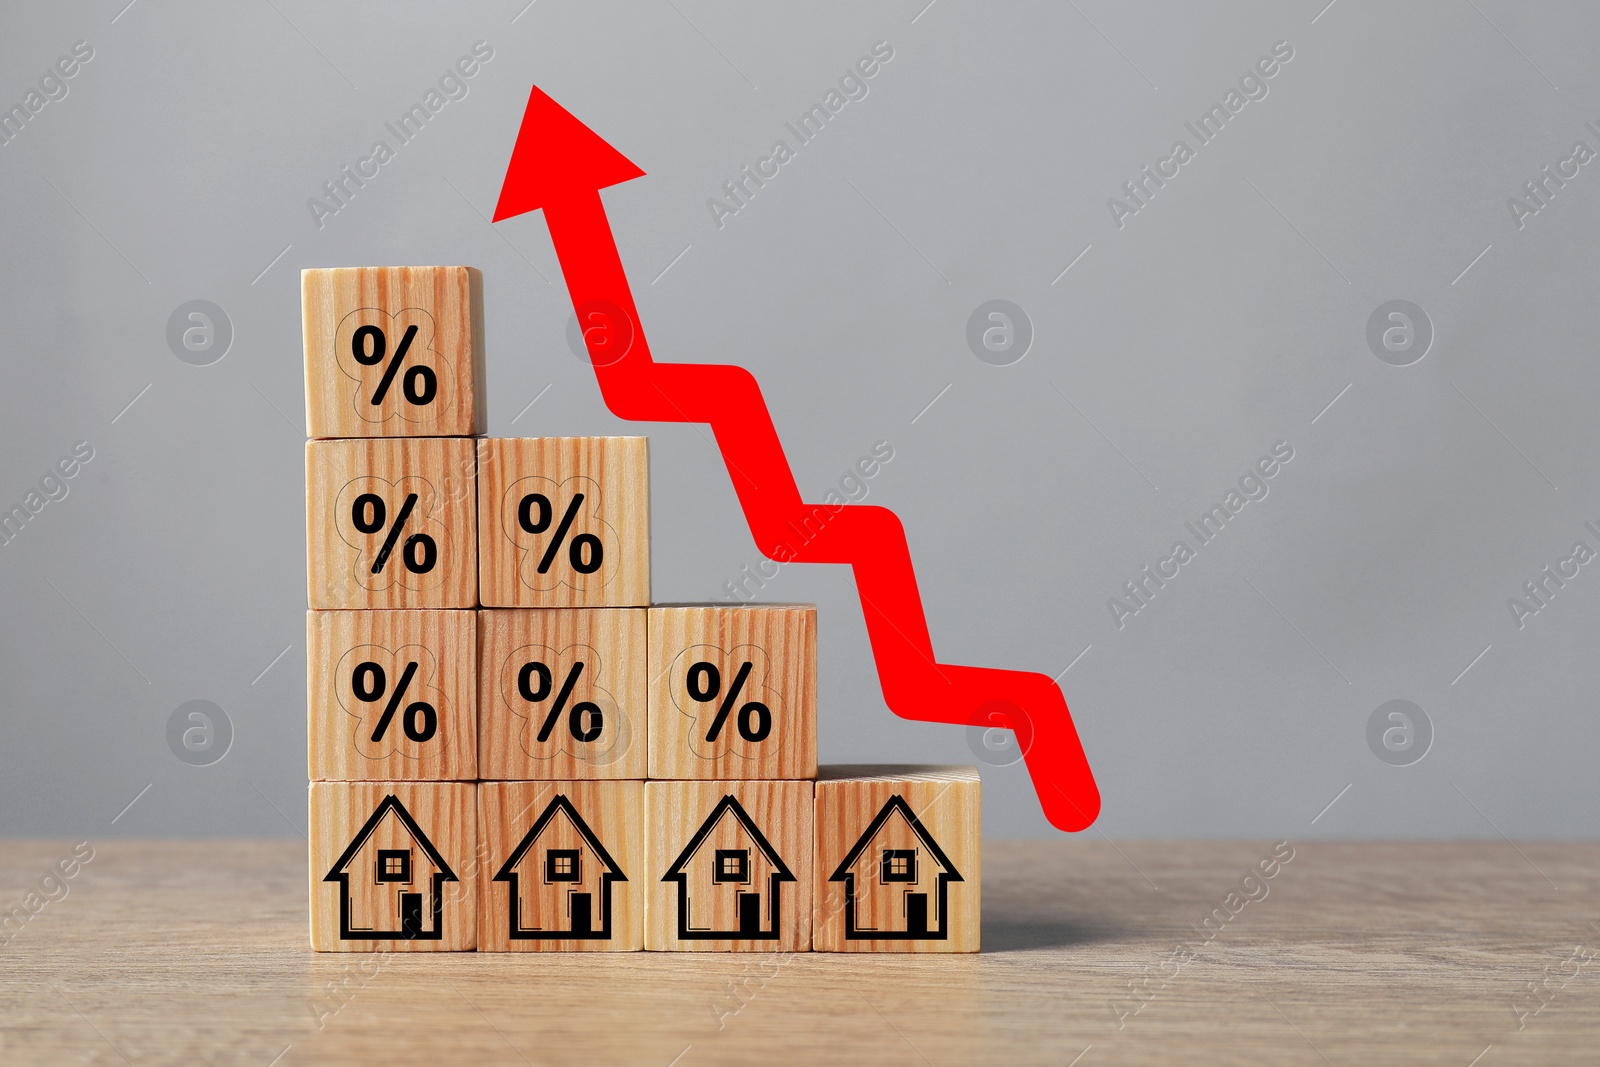 Image of Mortgage rate rising illustrated by upward arrow over cubes with percent signs and house icons on wooden table